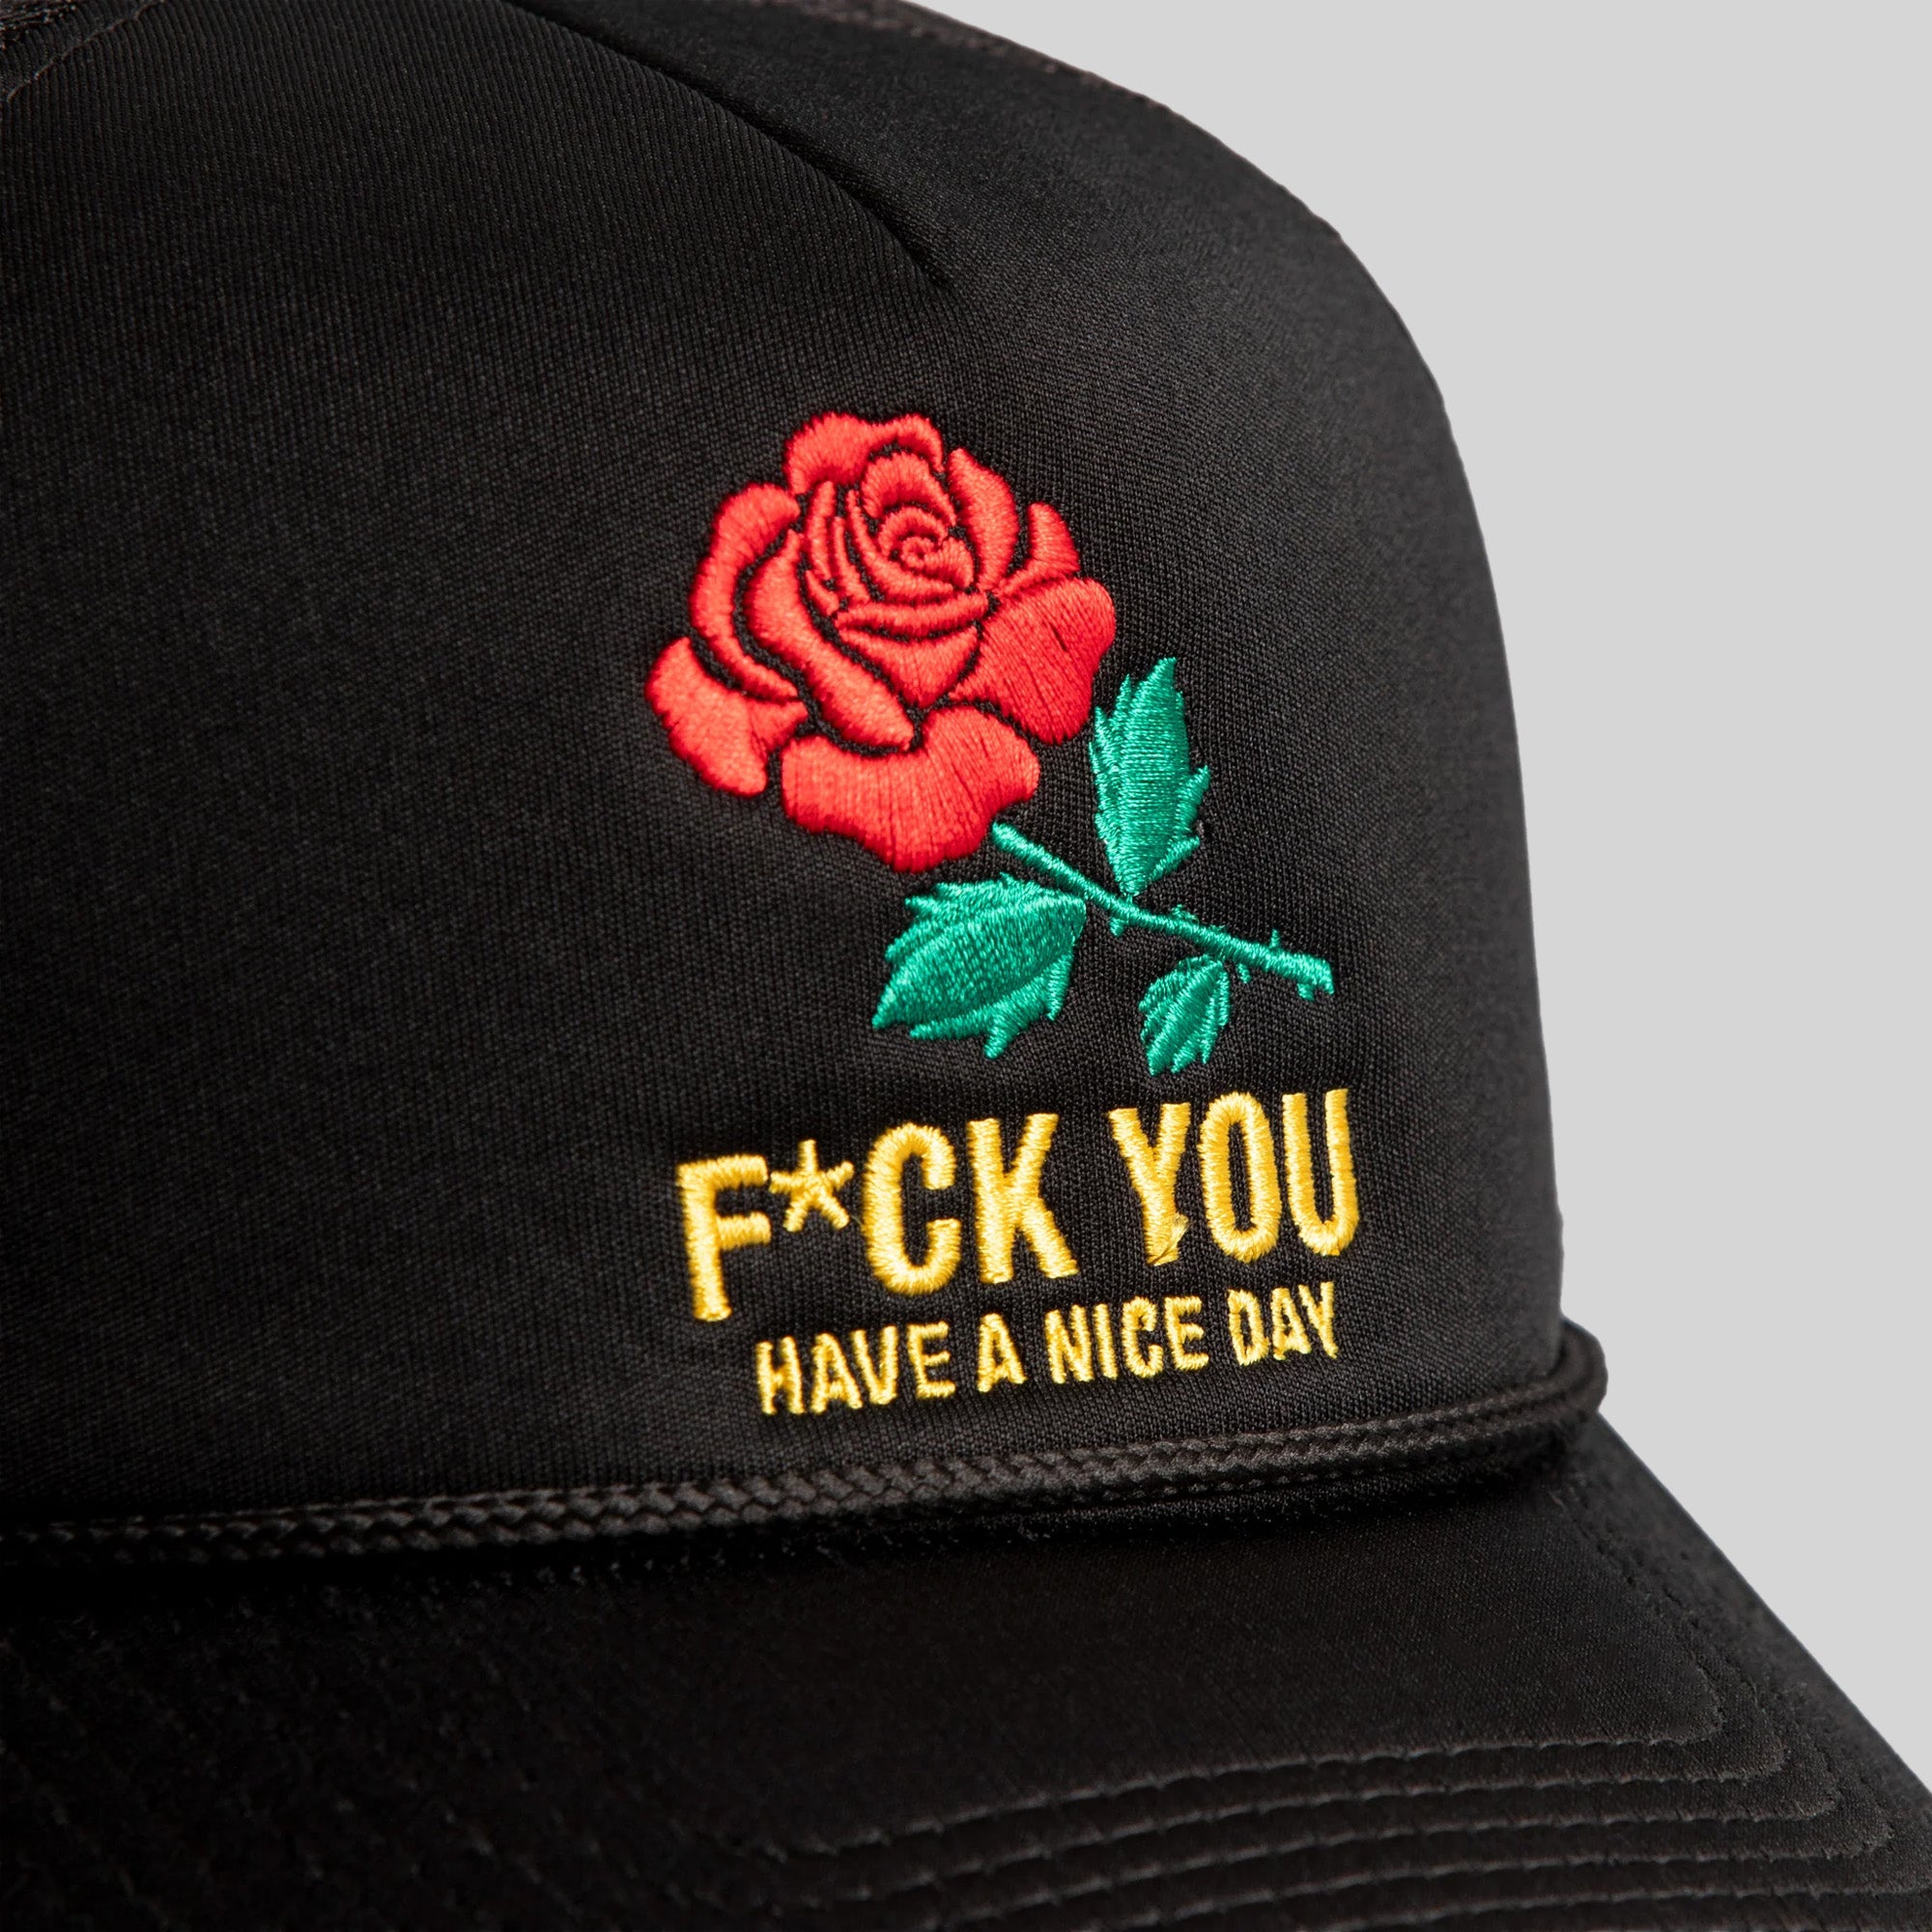 HAVE A NICE DAY BLACK TRUCKER HAT